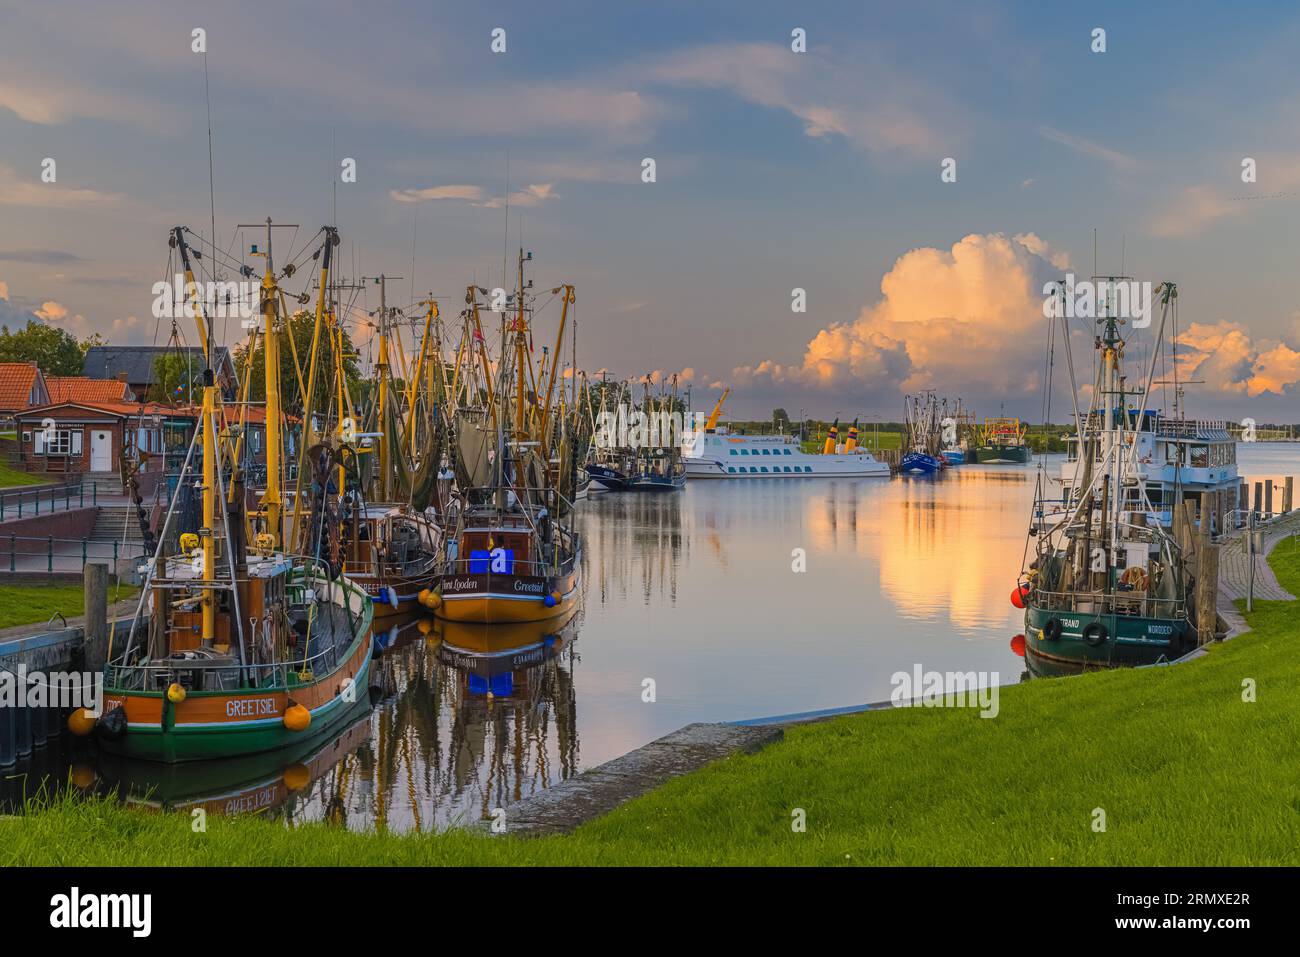 An evening photo of the picturesque harbor in the fishing village of Greetsiel. Greetsiel is a small harbor town on the Leybocht in the west of East F Stock Photo